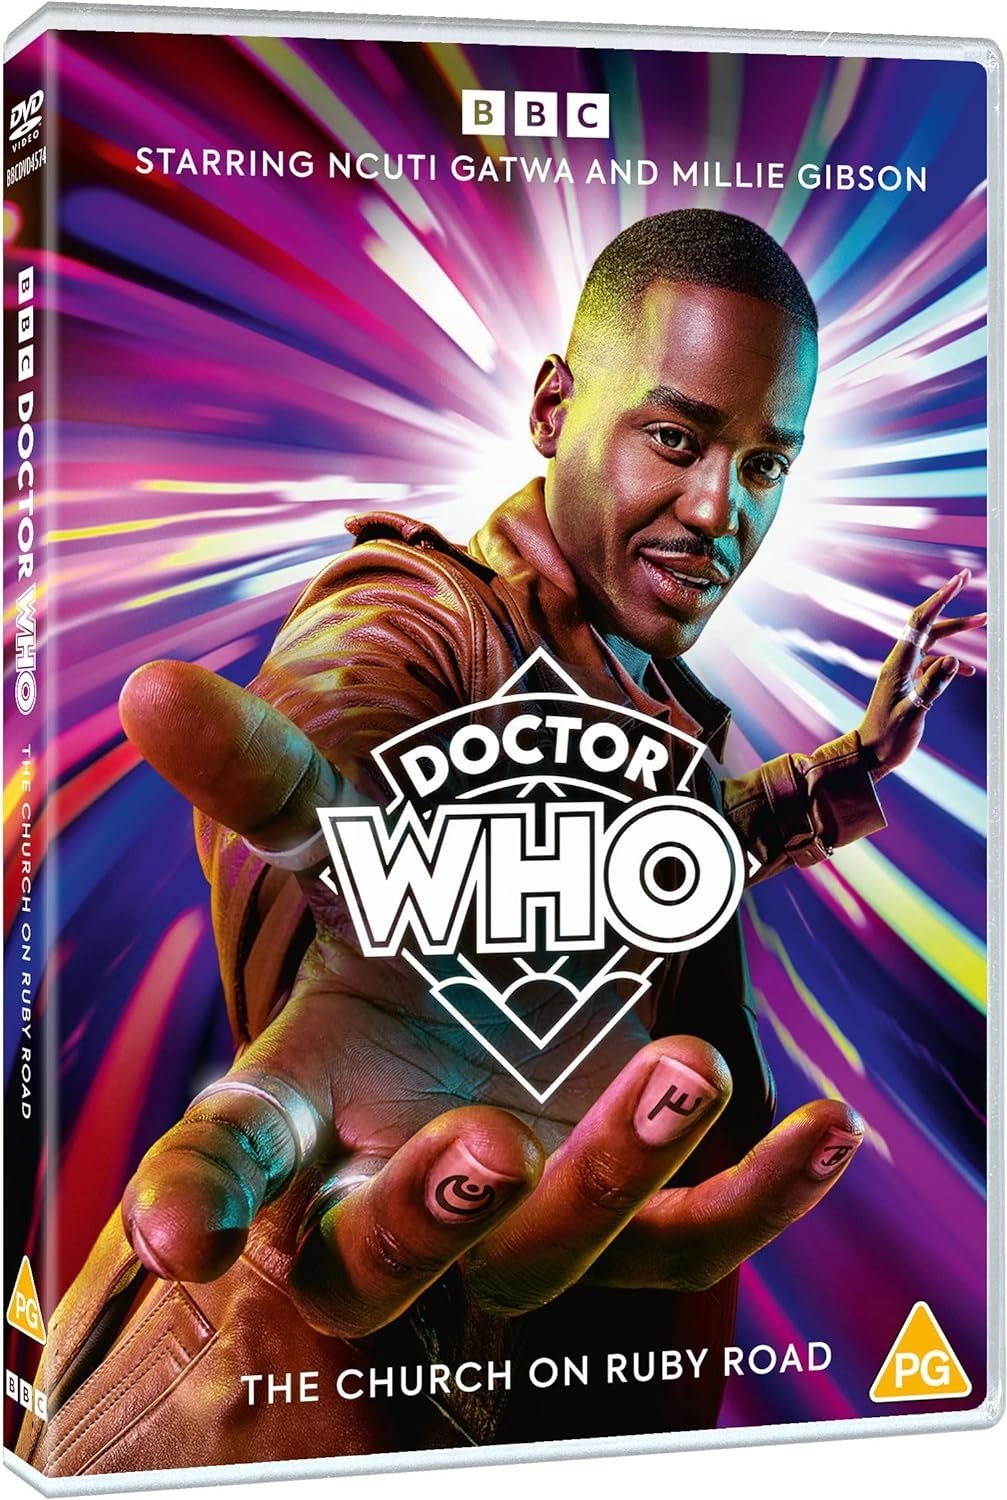 Doctor Who: The Church on Ruby Road to be Released on DVD and Blu-ray Next Month